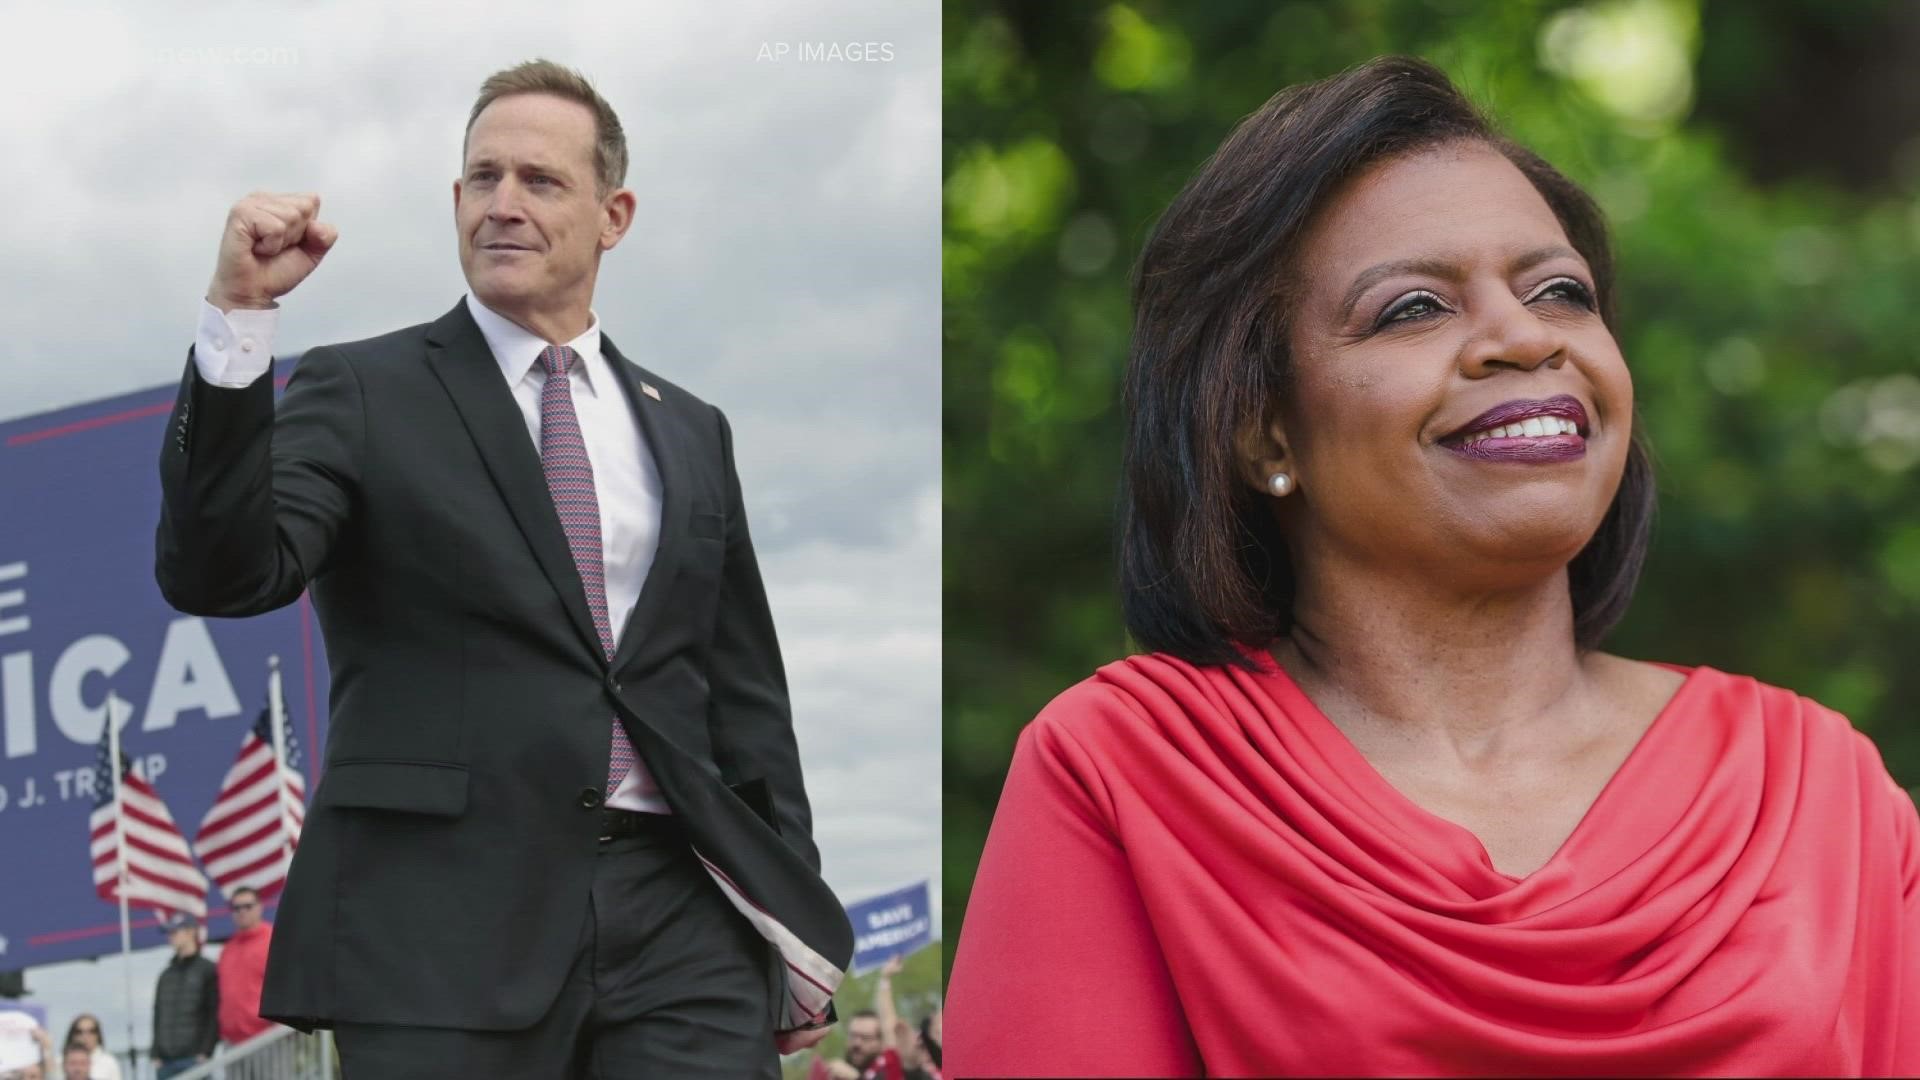 Republican U.S. Rep. Ted Budd will face Democrat Cheri Beasley in North Carolina's Senate race after both easily clinched primary victories Tuesday night.